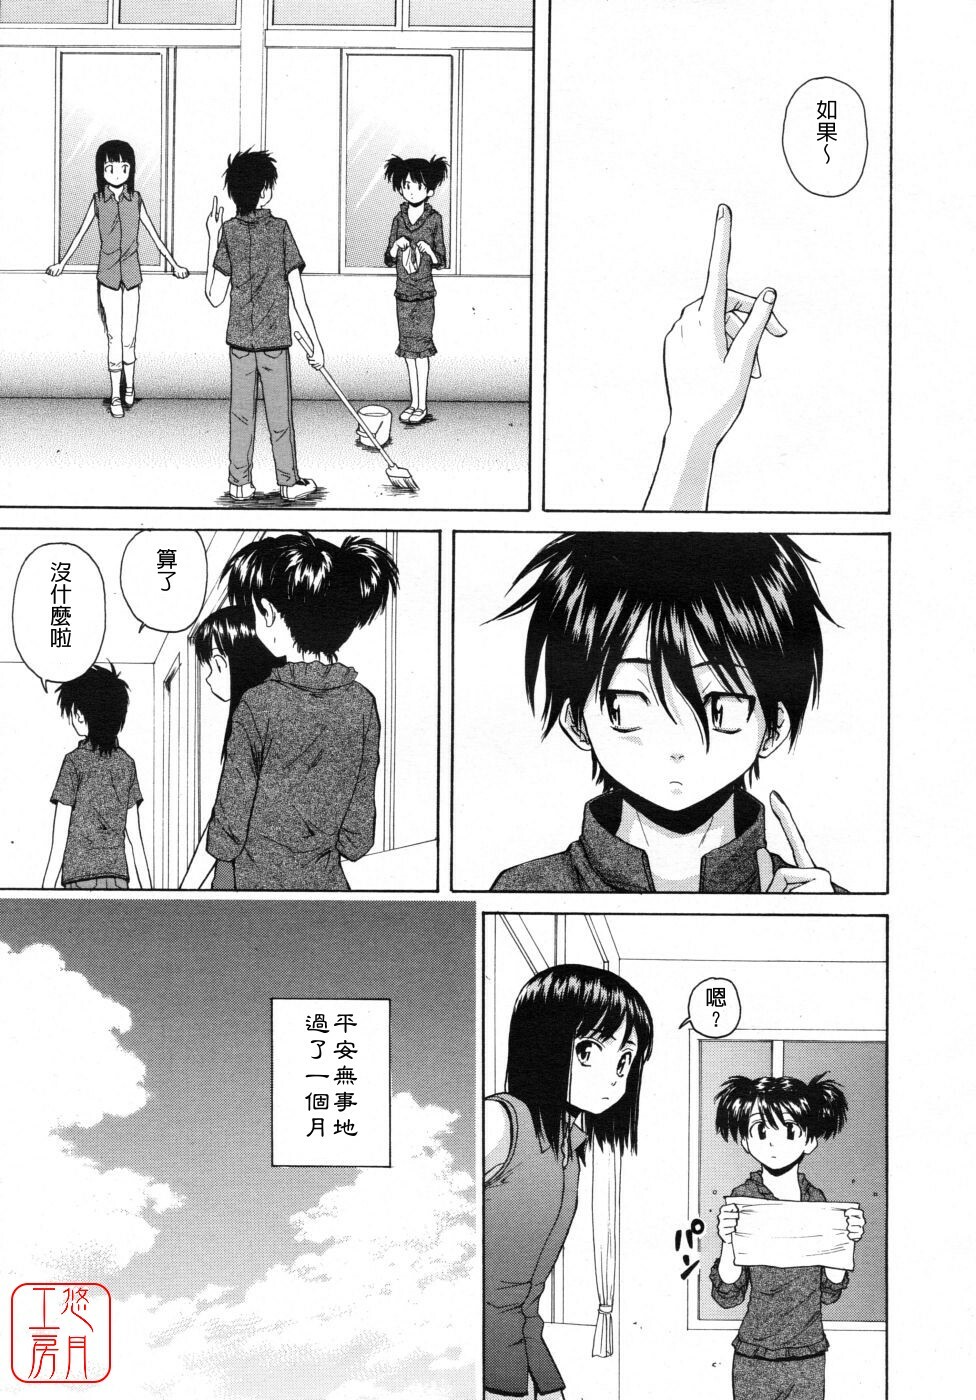 [Fuuga] Girl Friend 2 (Chinese) page 3 full